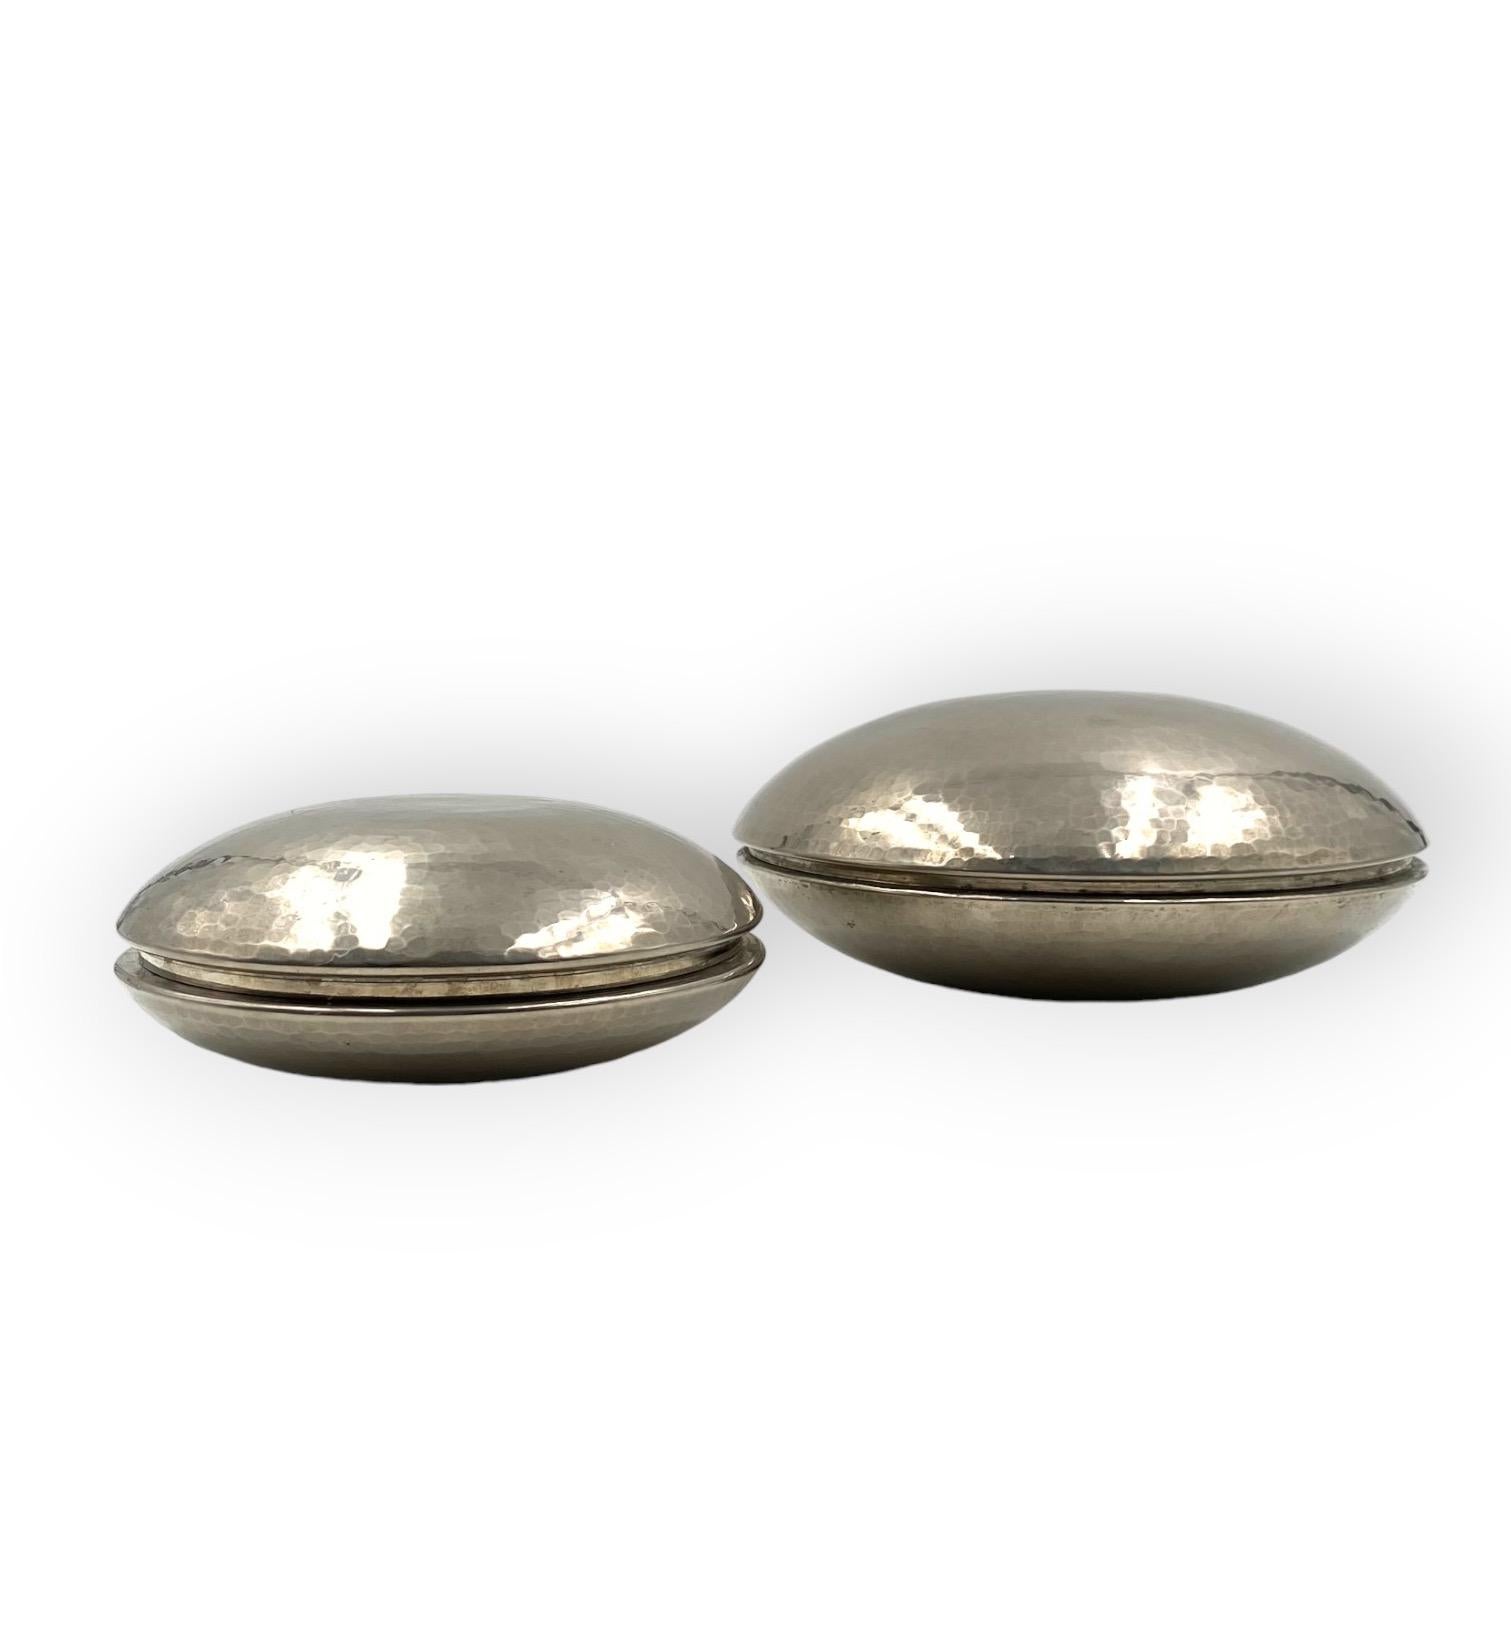 Hollywood regency silver-plated set of 2 vide poche, M. Marini, Laras Italy 1970 For Sale 7